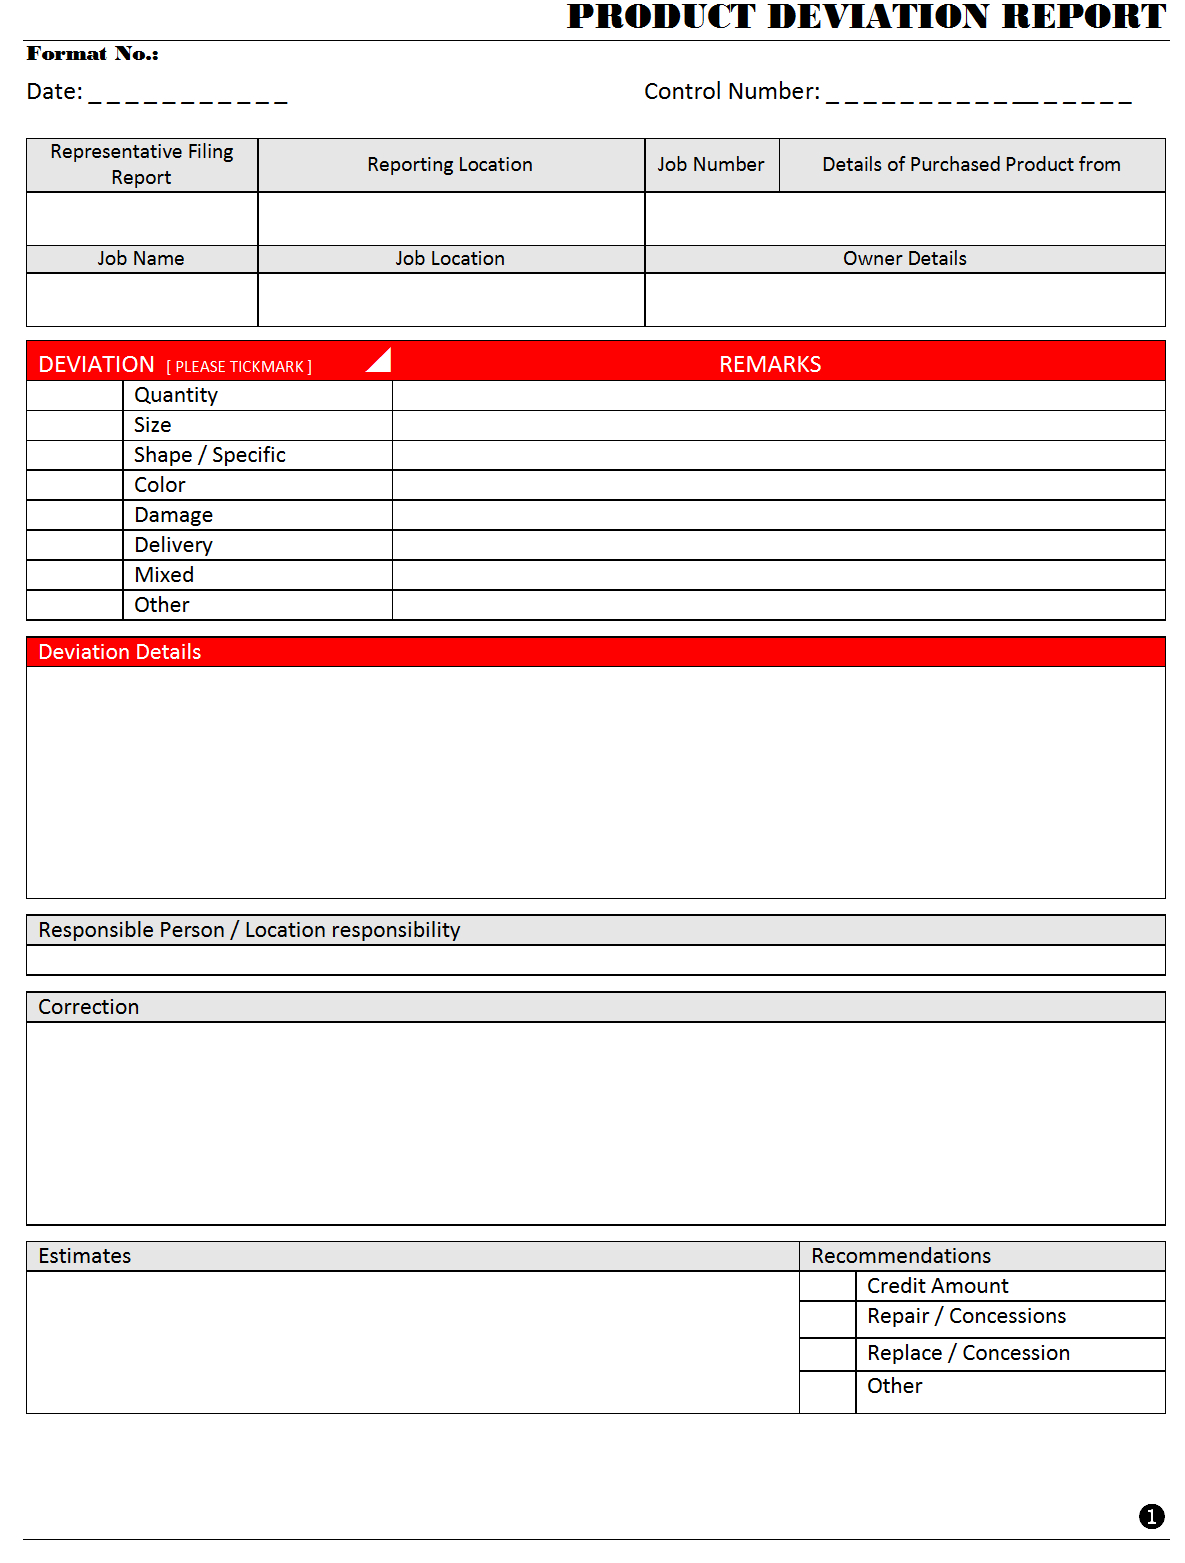 Product Deviation Report - Inside Deviation Report Template